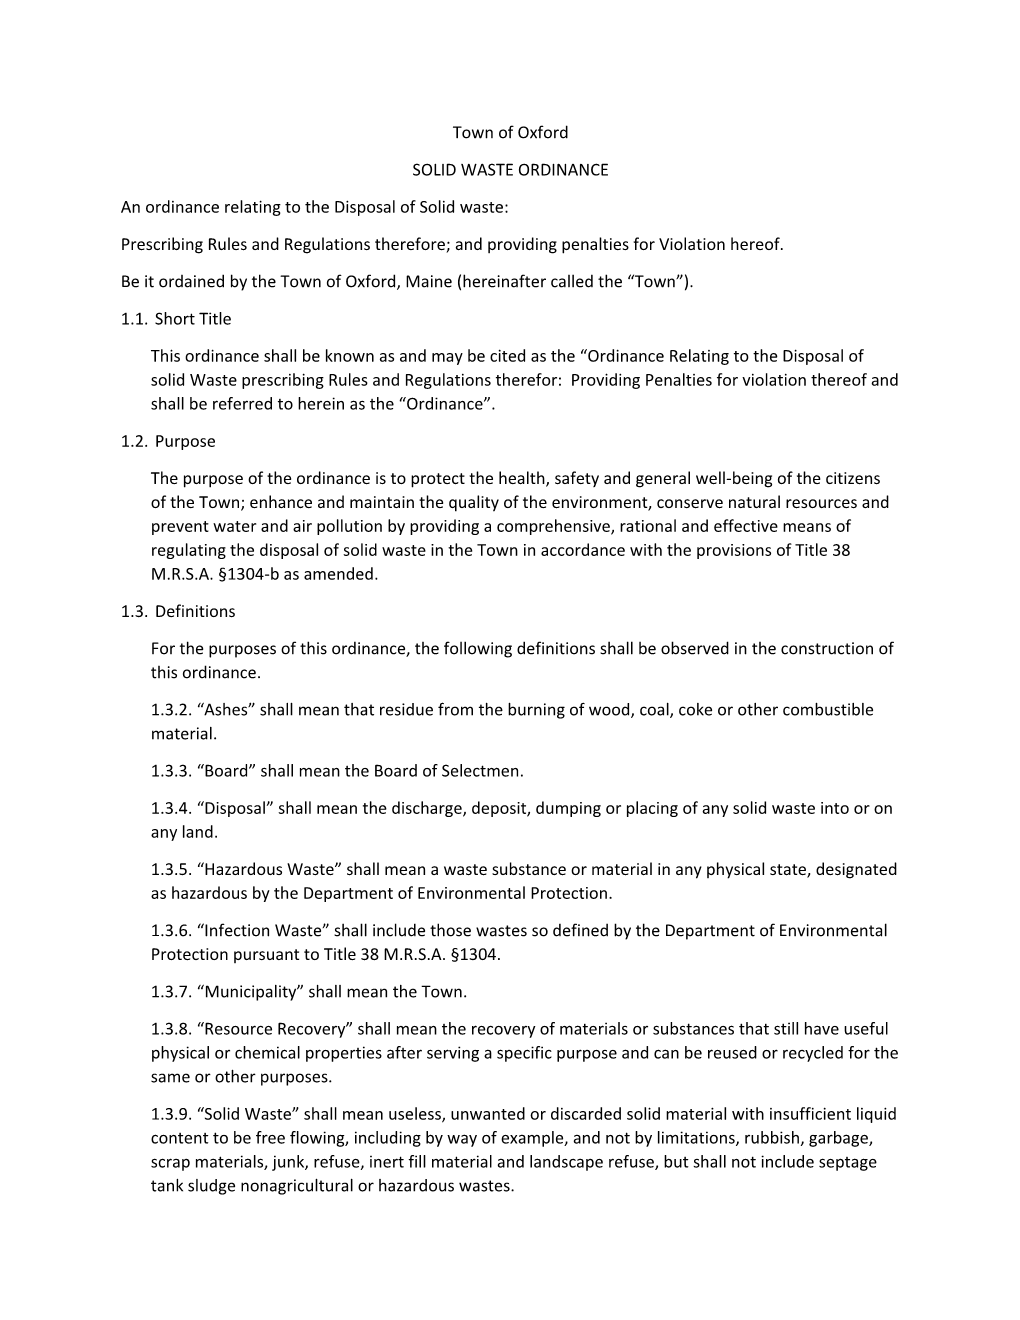 An Ordinance Relating to the Disposal of Solid Waste